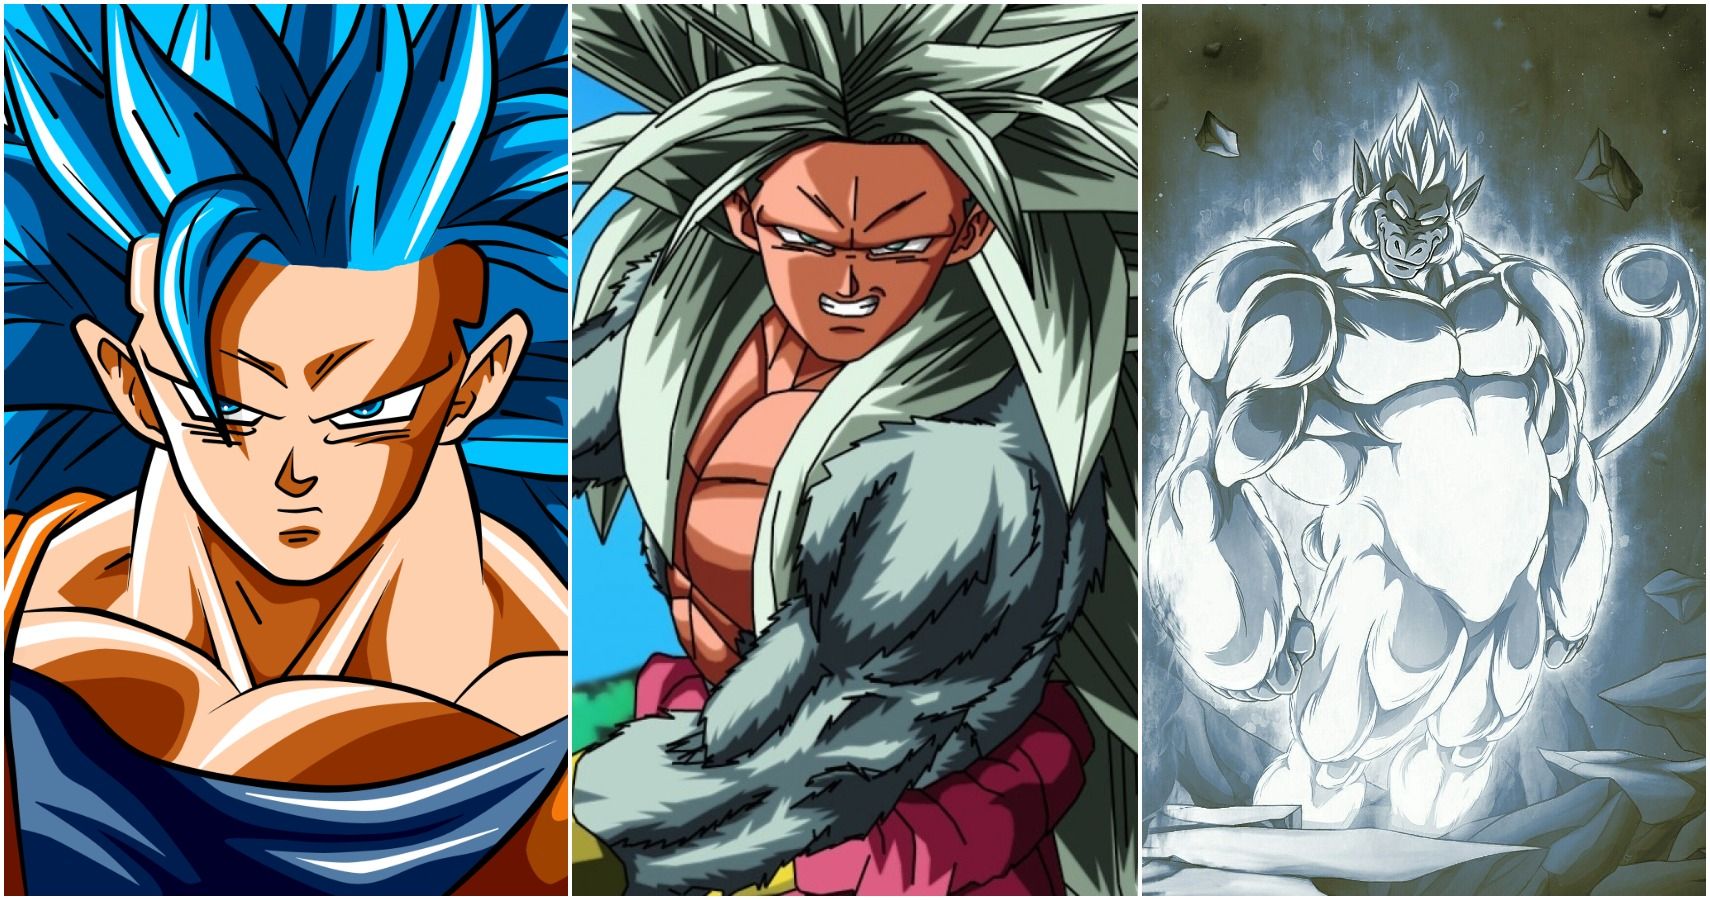 If you could create your own transformations for the Dragon Ball